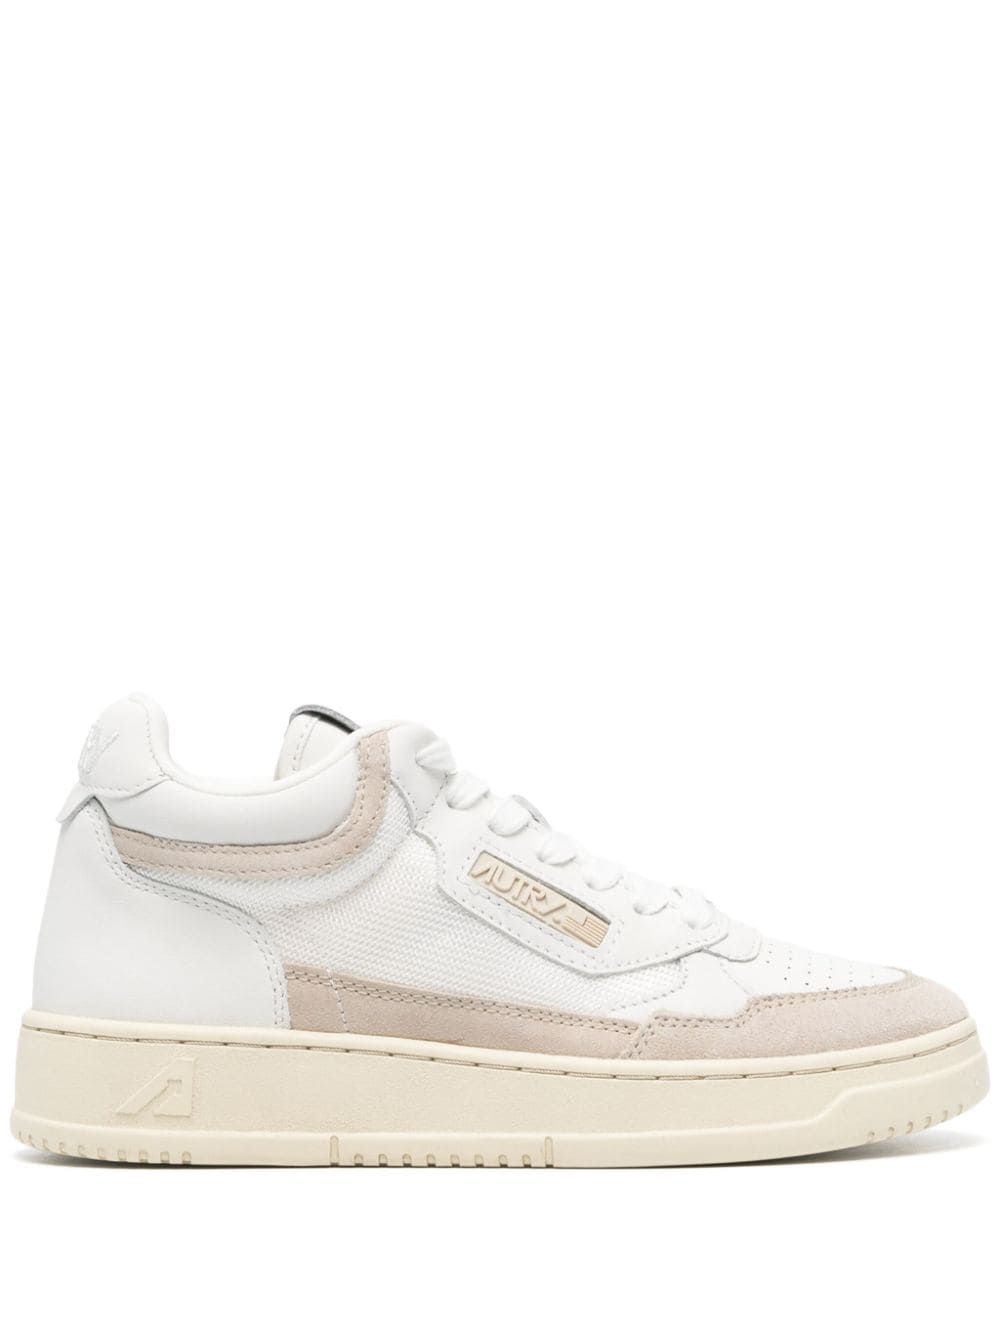 Autry Open leather sneakers - White von Autry